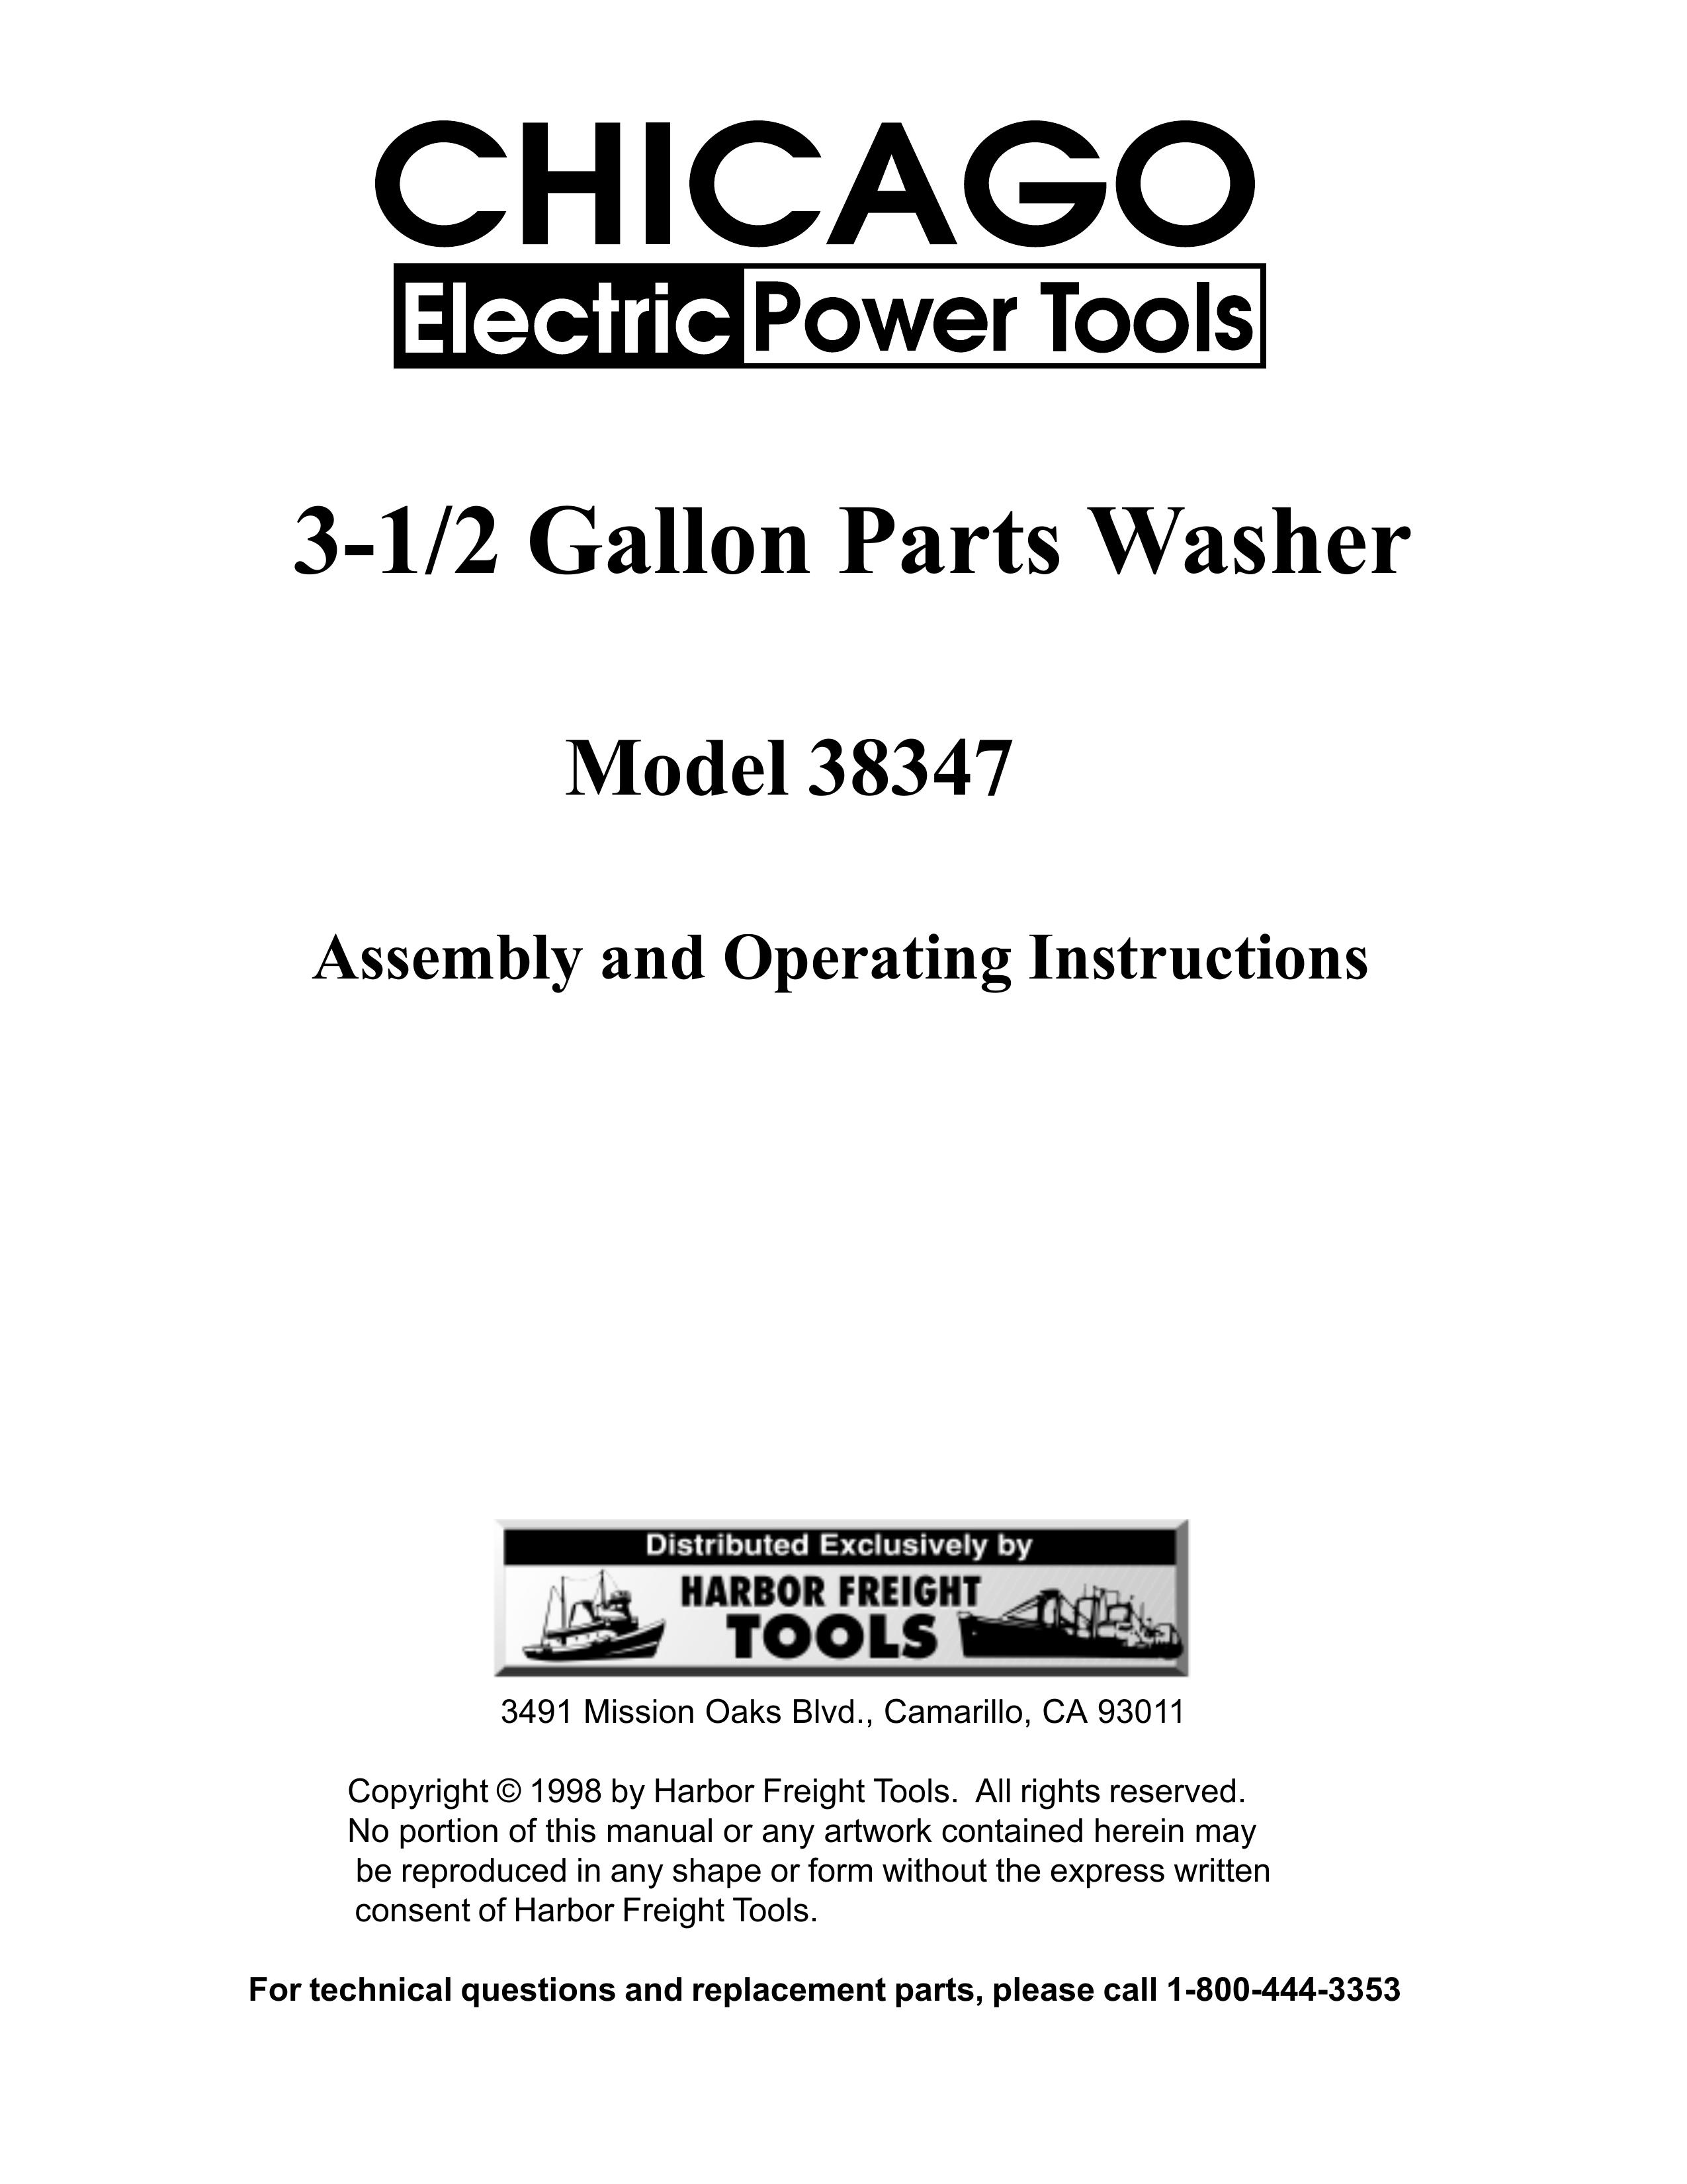 Chicago Electric 38347 Washer User Manual